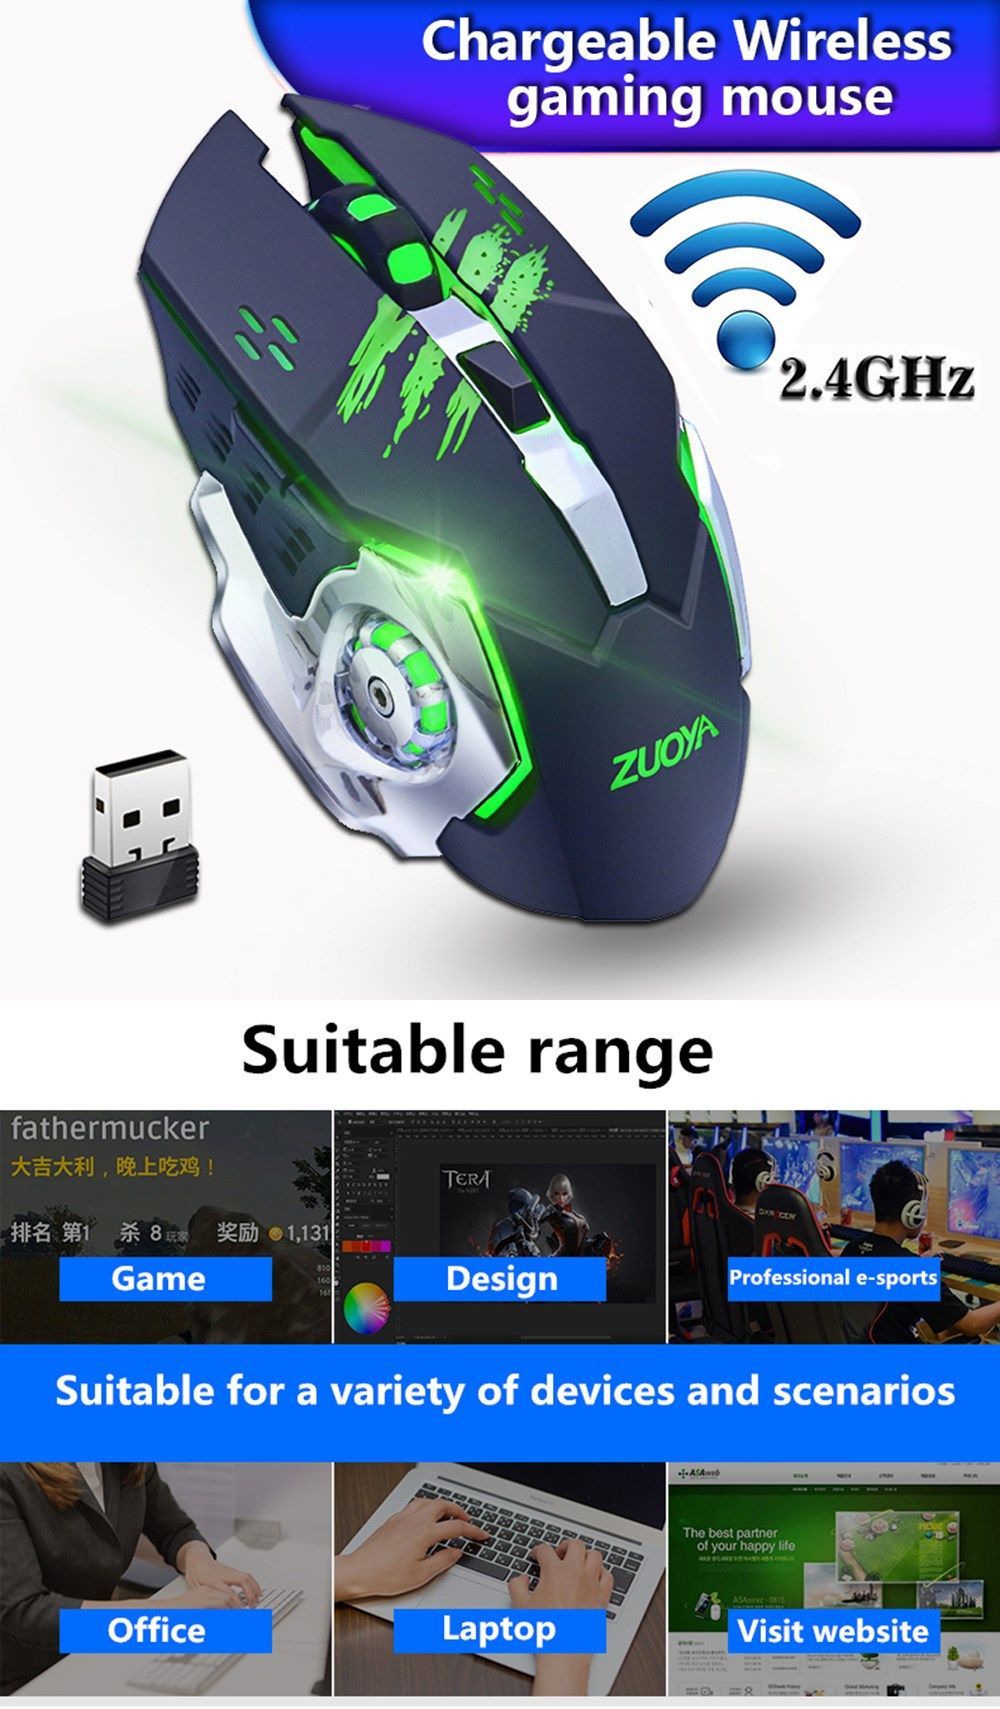 ZUOYA-MMR4-Wireless-Mouse-24GHz-Receiver-LED-Mute-Silent-Rechargeable-USB-Gaming-Computer-Optical-Ga-1614283